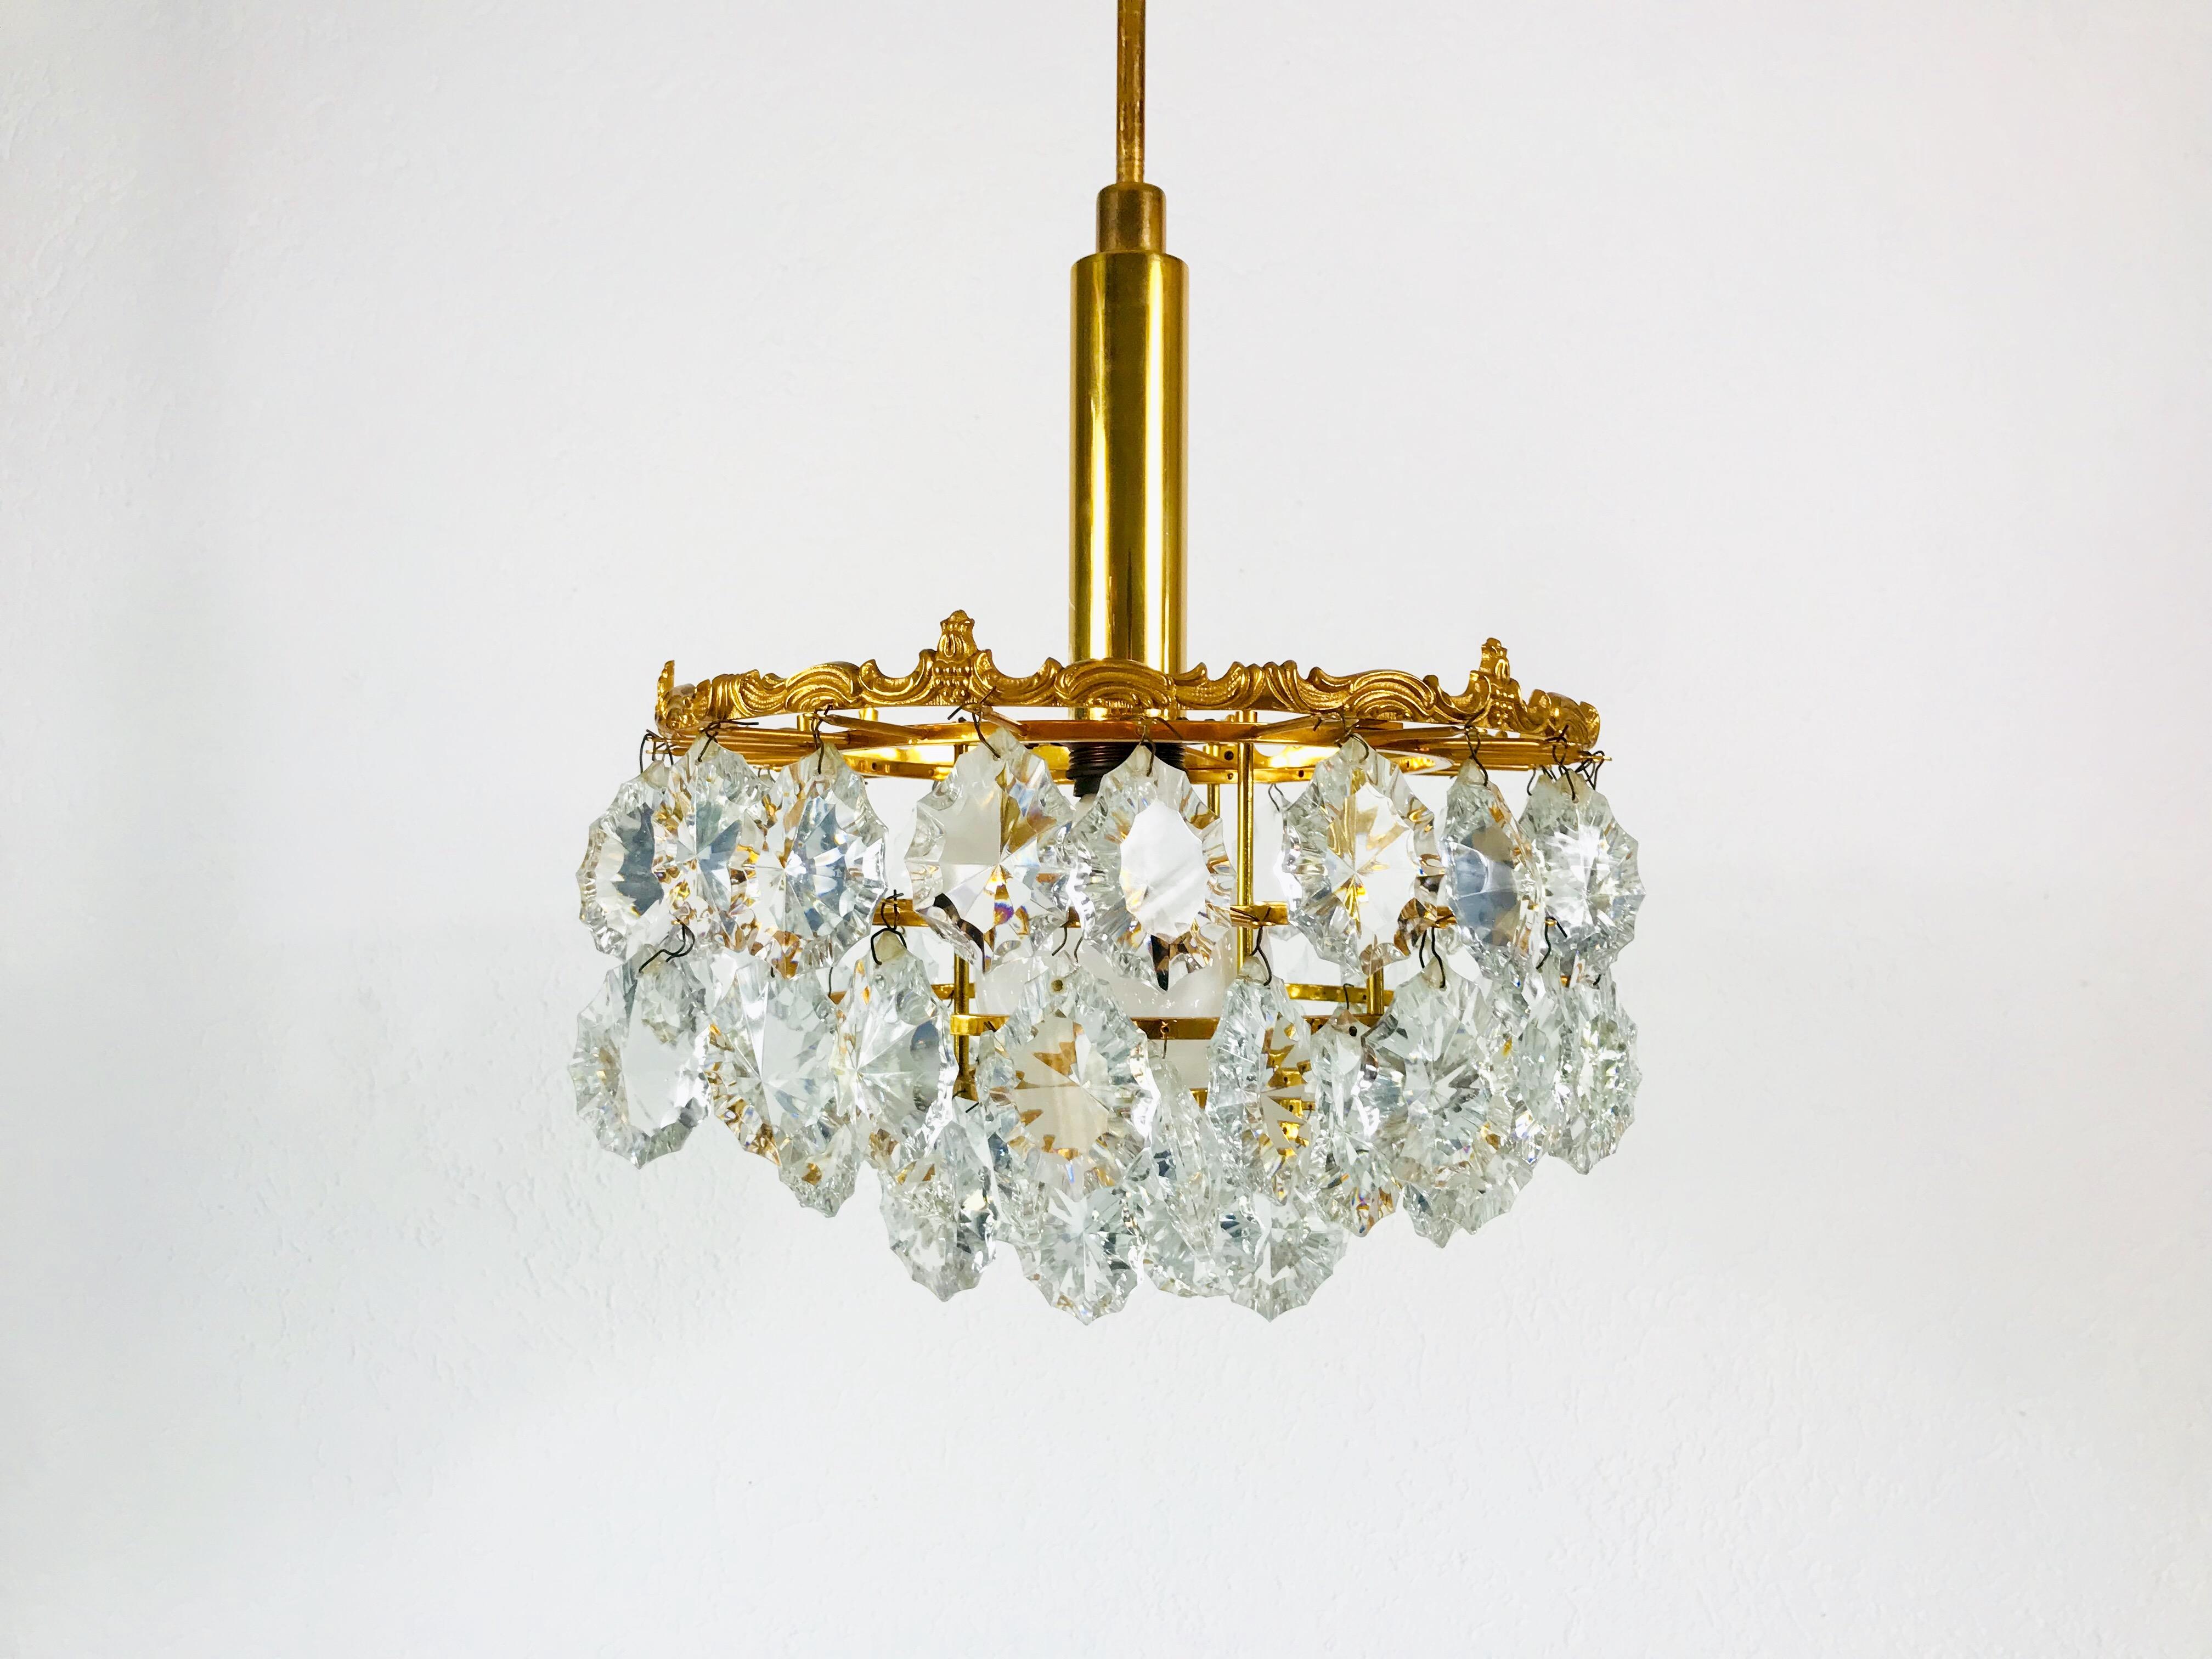 Gilt Brass and Crystal Glass 4-Tier Chandelier by Palwa, Germany, 1970s For Sale 2